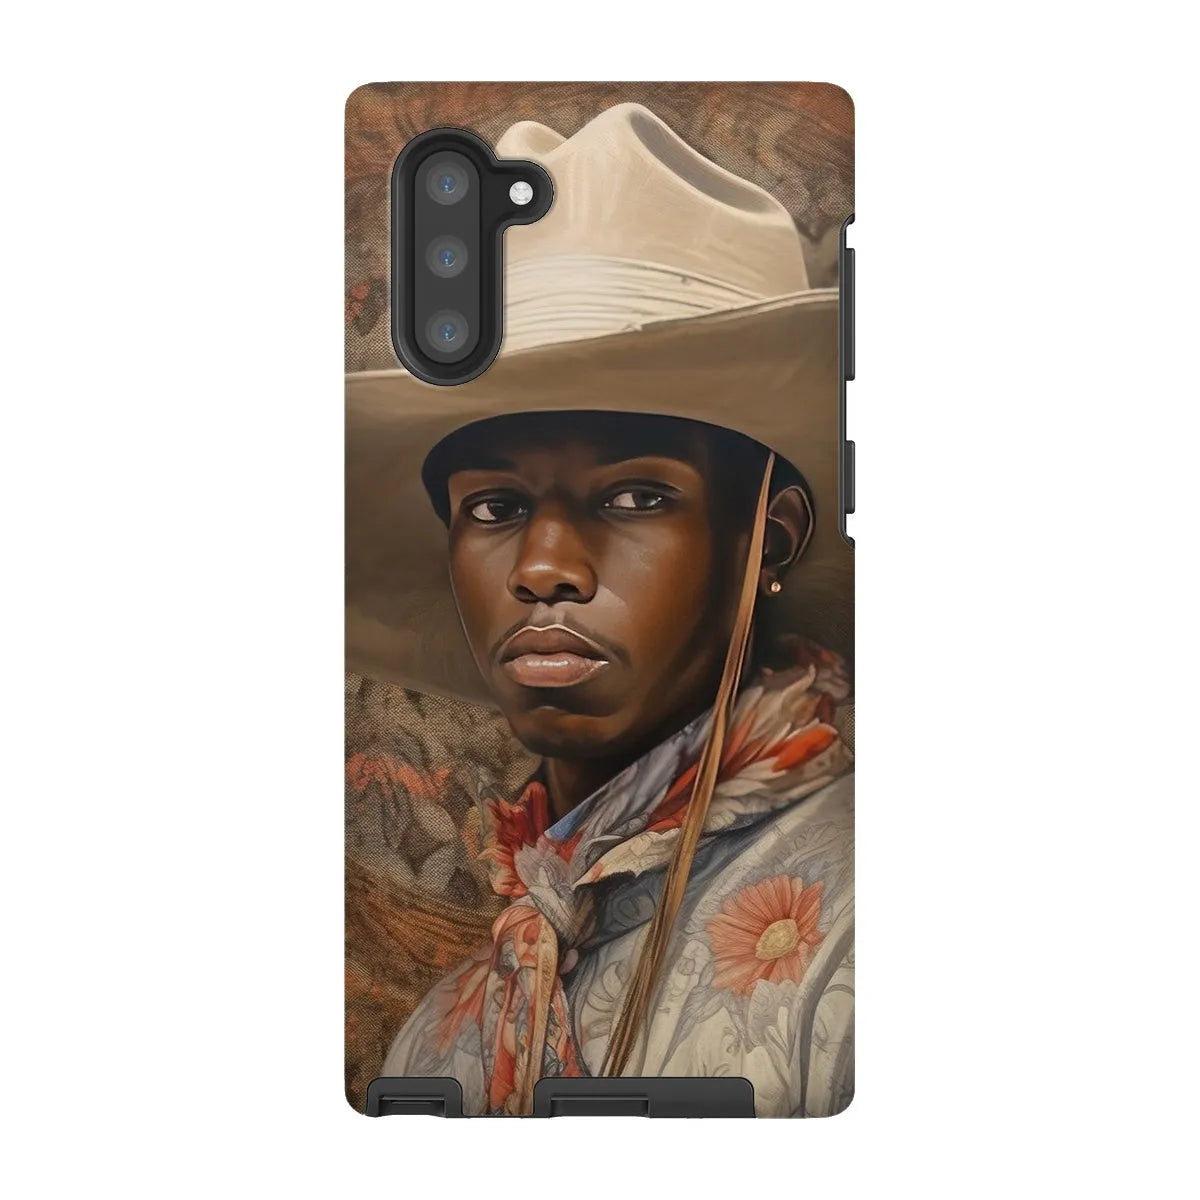 Titus The Gay Cowboy - Dandy Gay Men Art Phone Case - Samsung Galaxy Note 10 / Matte - Mobile Phone Cases - Aesthetic